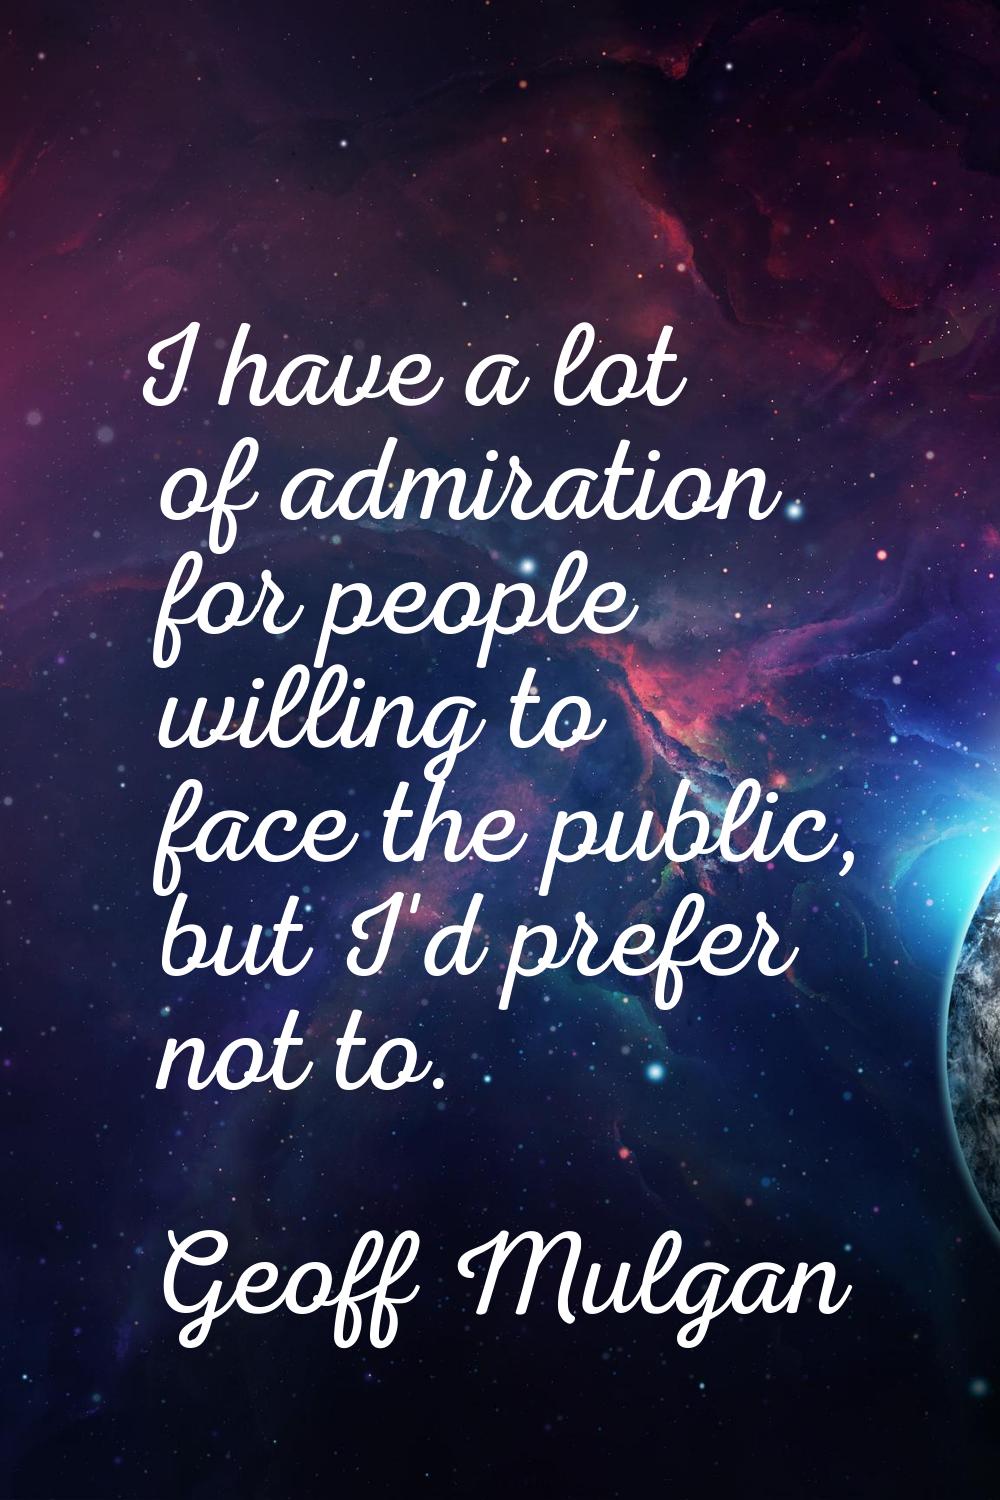 I have a lot of admiration for people willing to face the public, but I'd prefer not to.